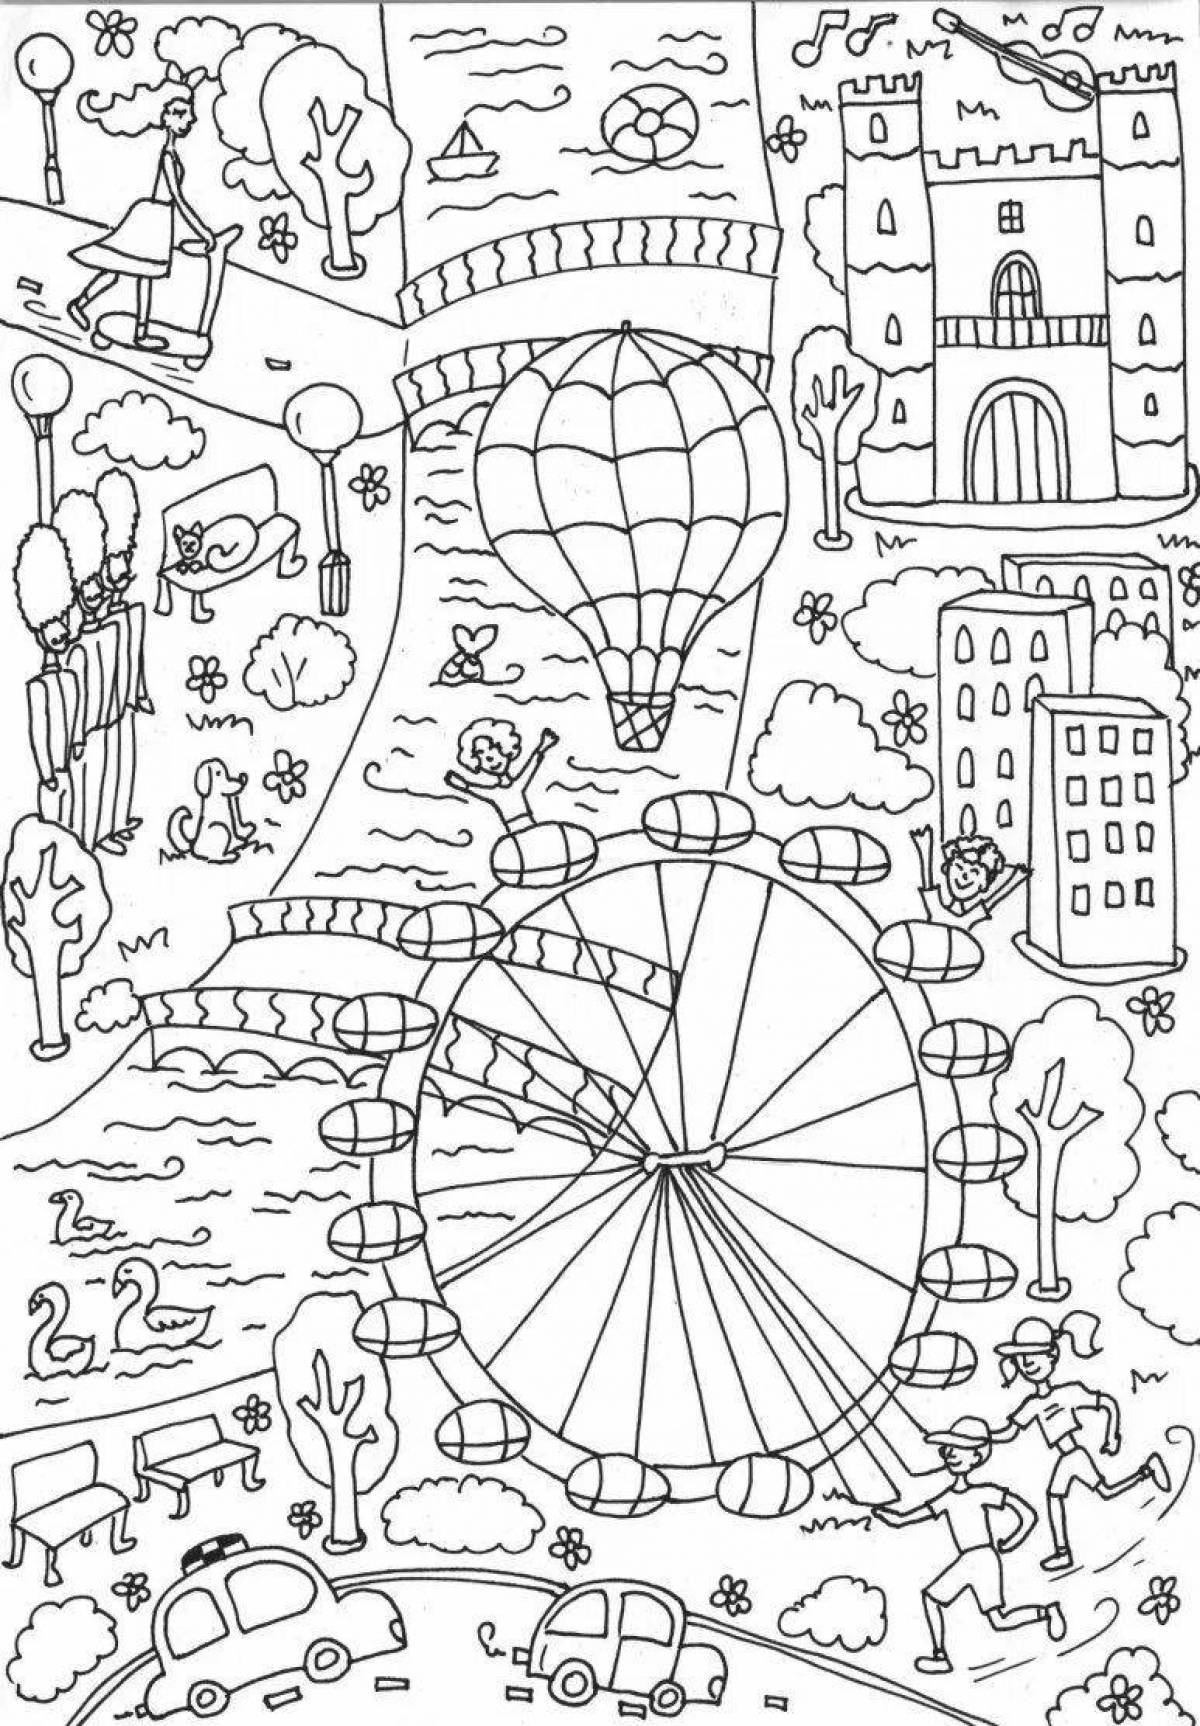 Cute london coloring pages for kids